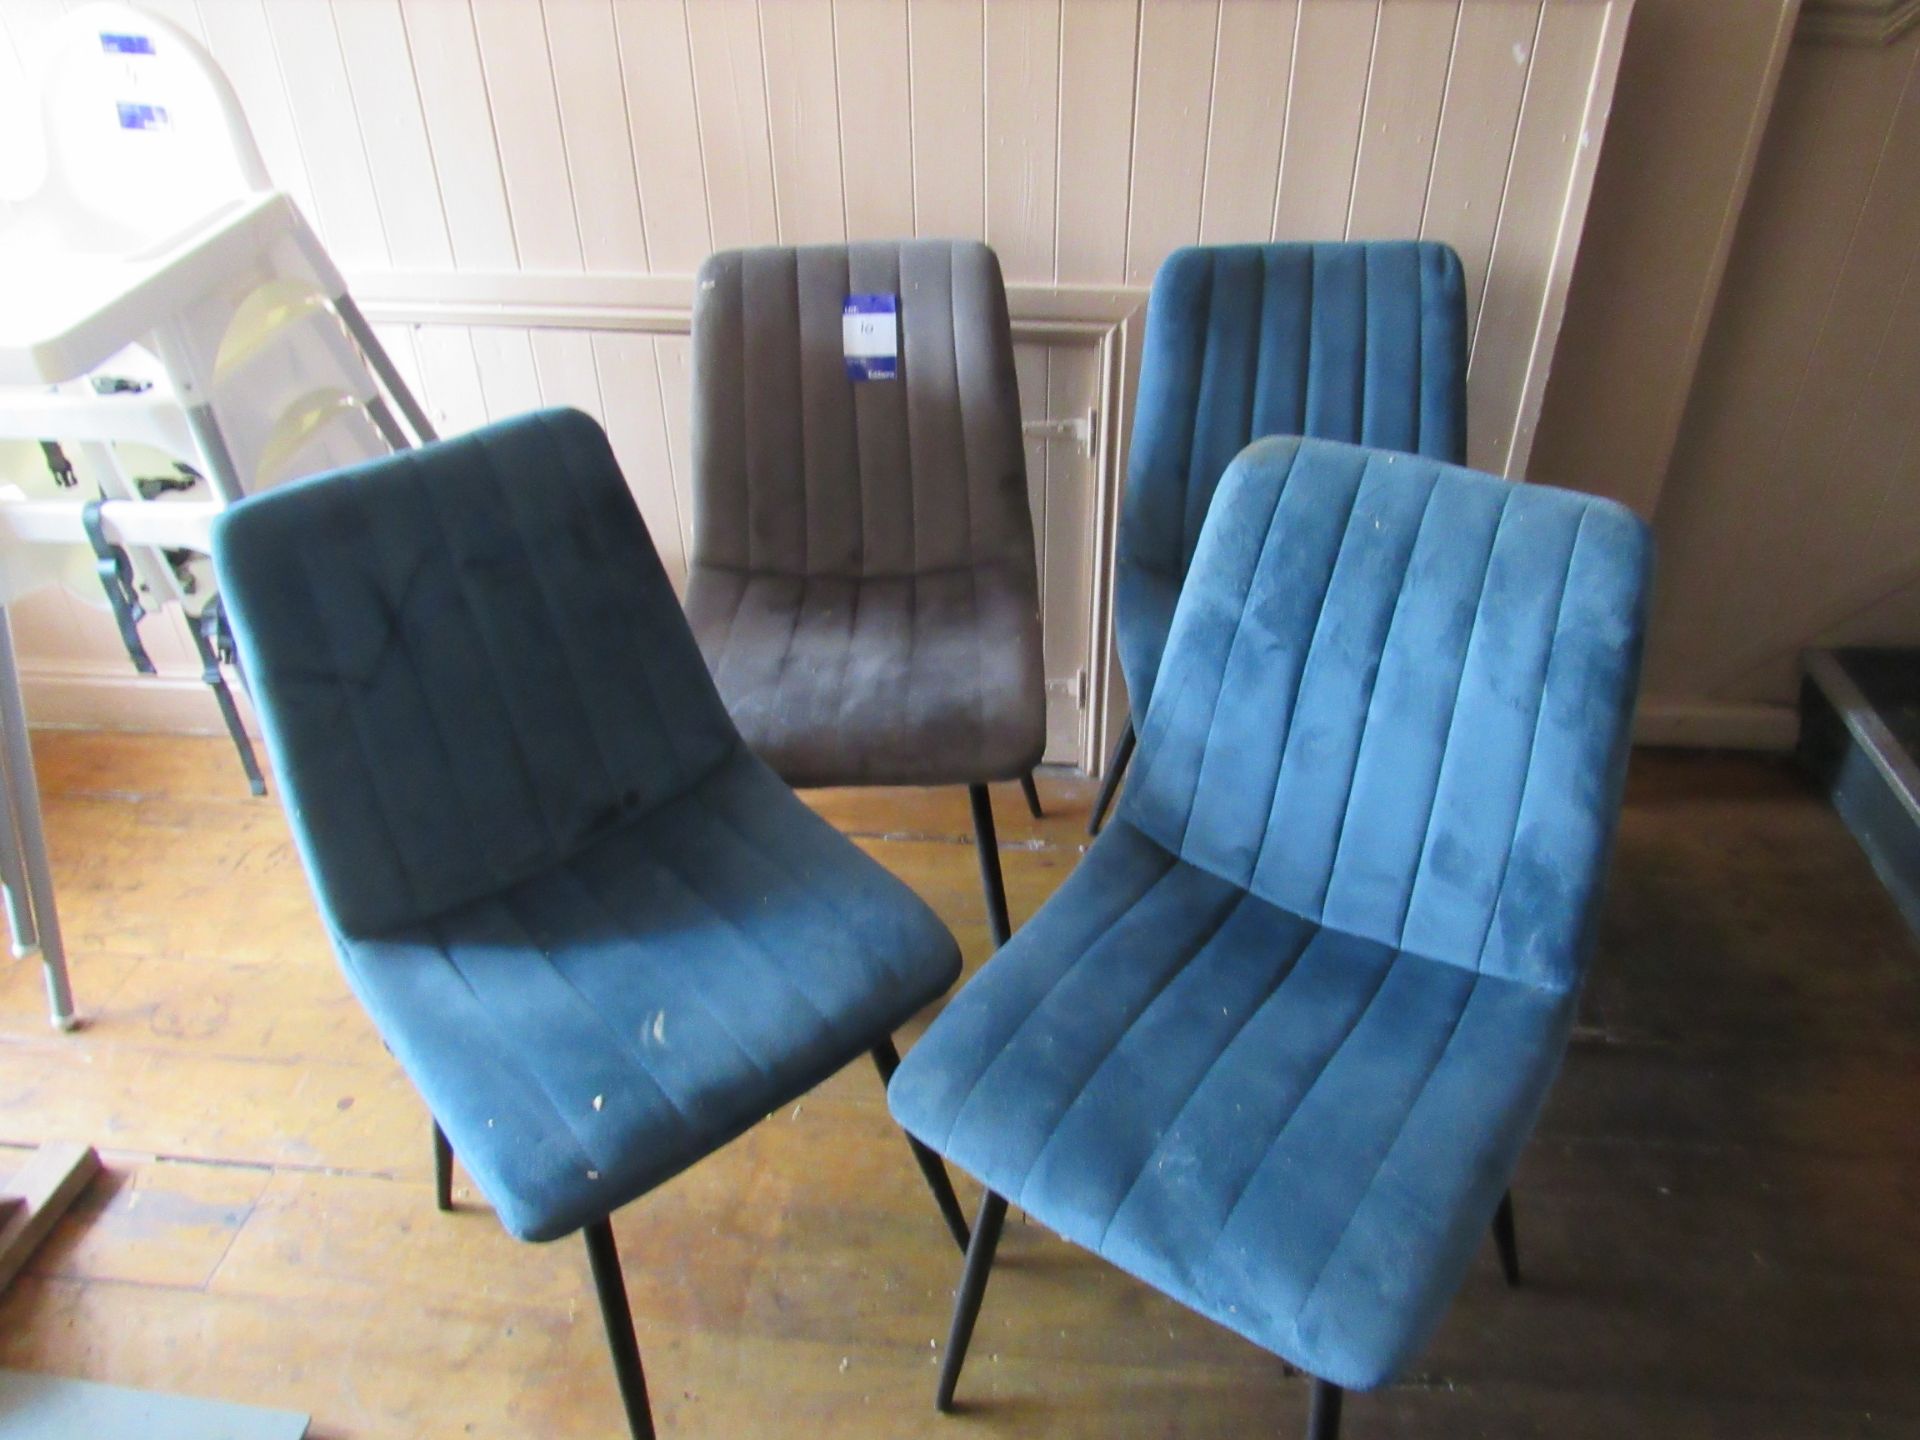 4 x Upholstered chairs